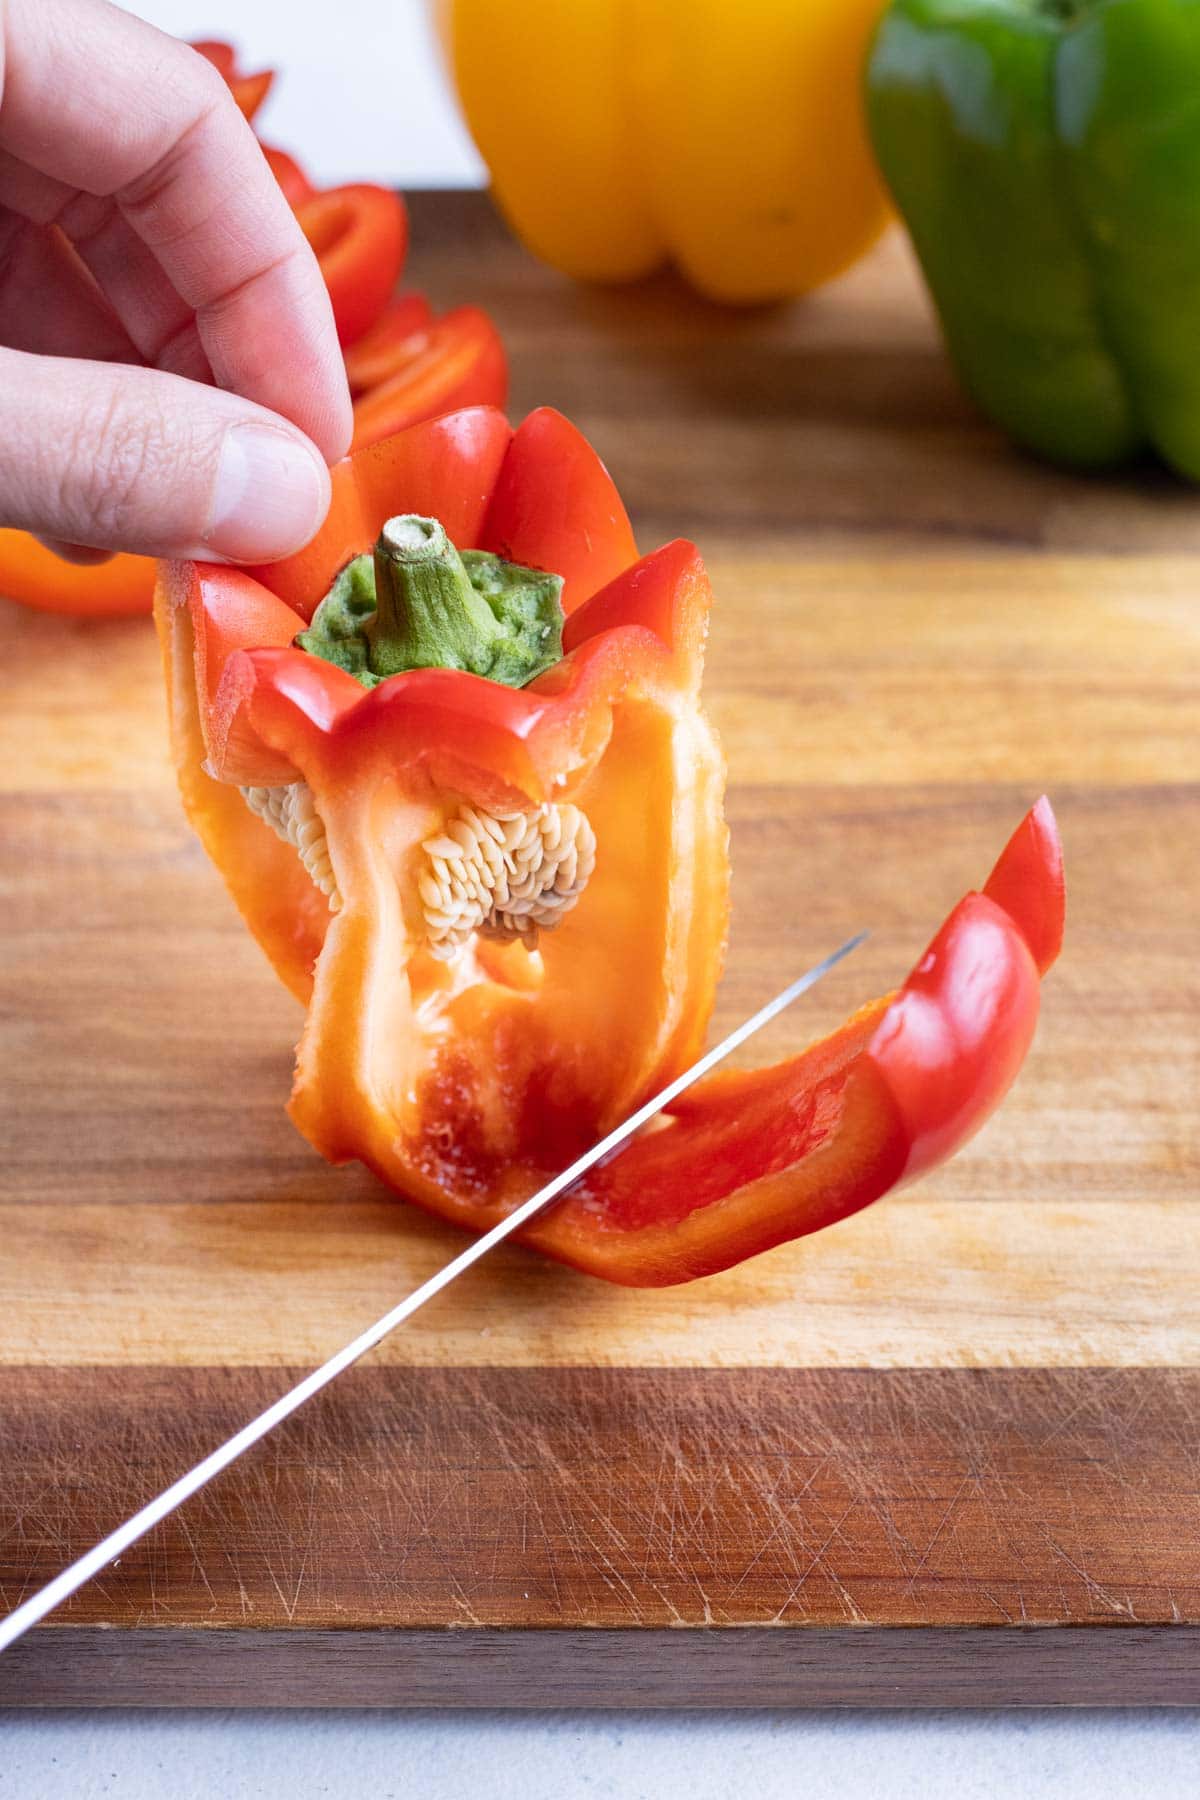 A knife is used to prepare the bell pepper.